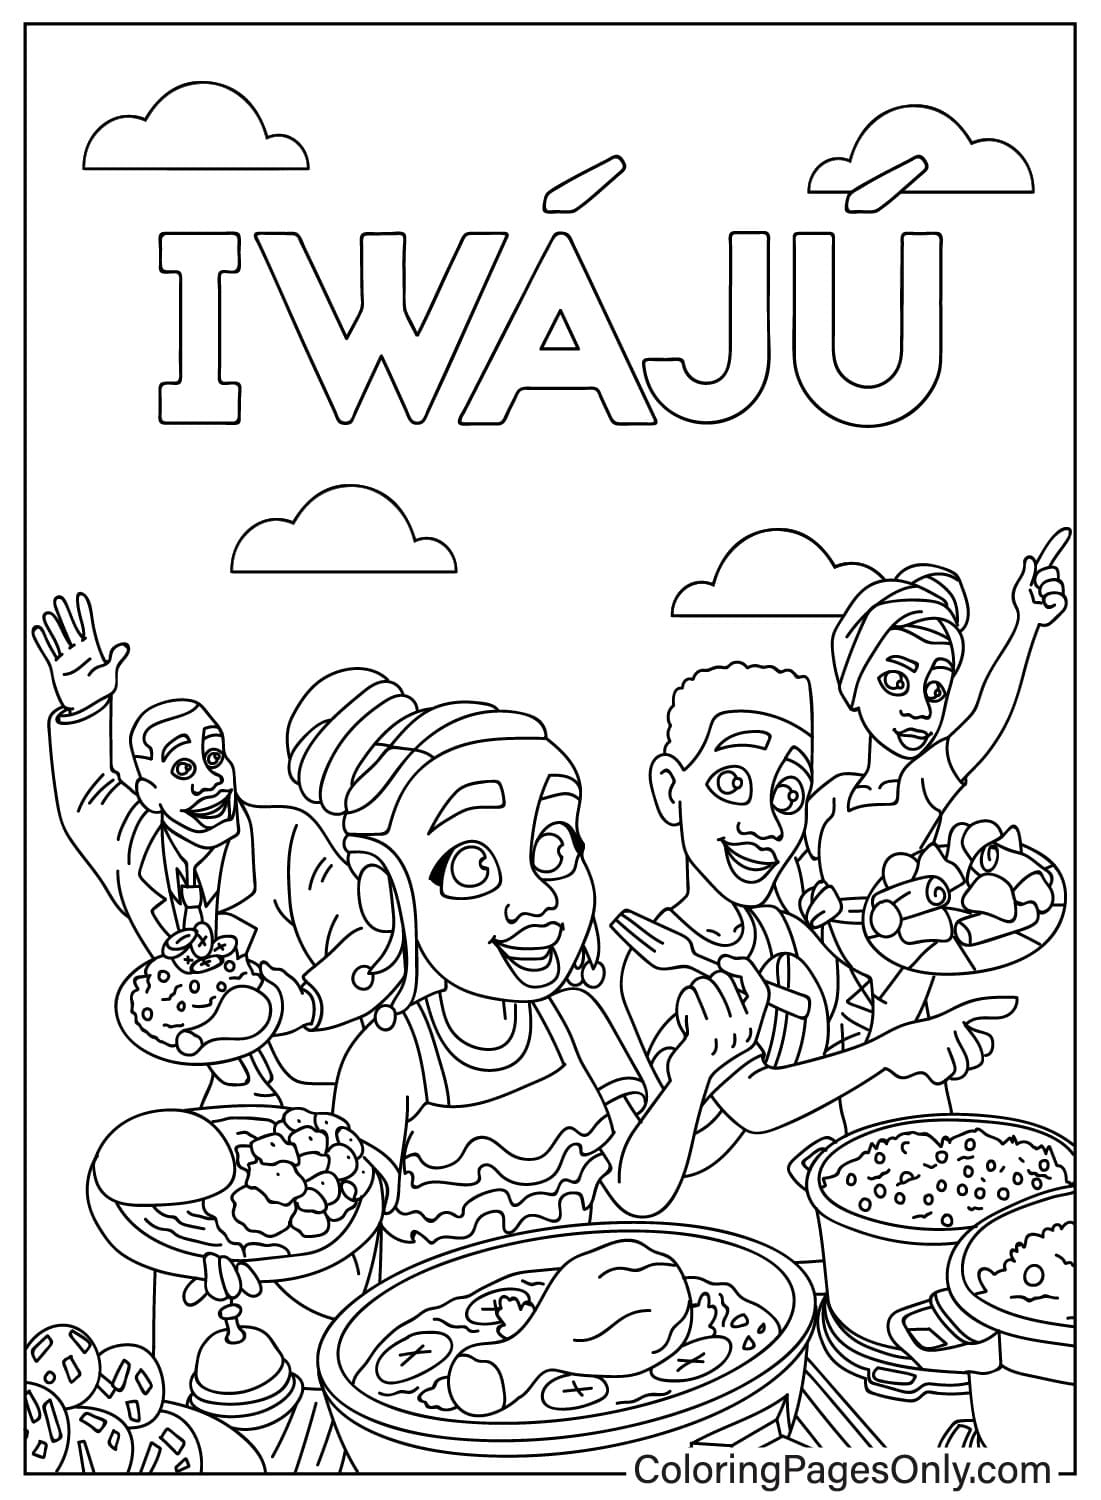 Pictures Iwájú Coloring Page from Iwájú